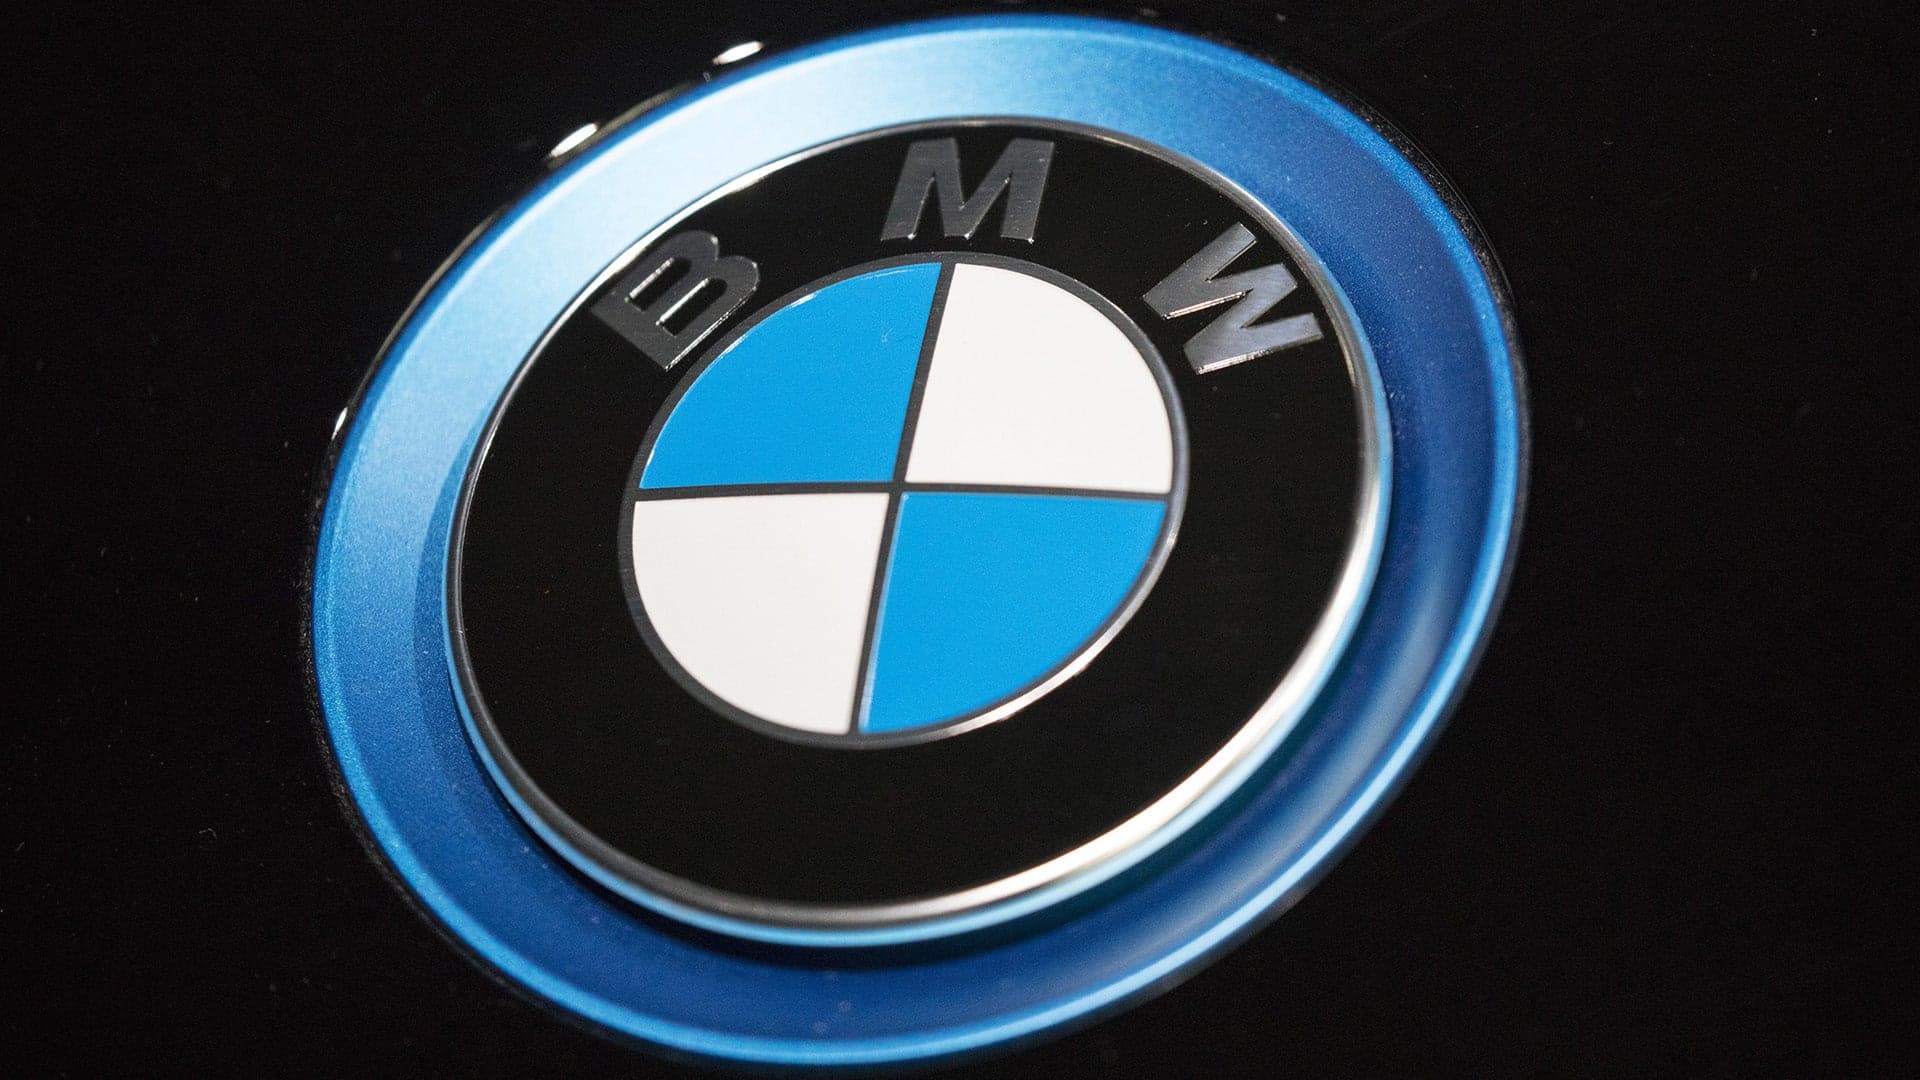 BMW Expects Trump’s Trade Kerfuffles to Cost Over $1.1 Billion in 2019